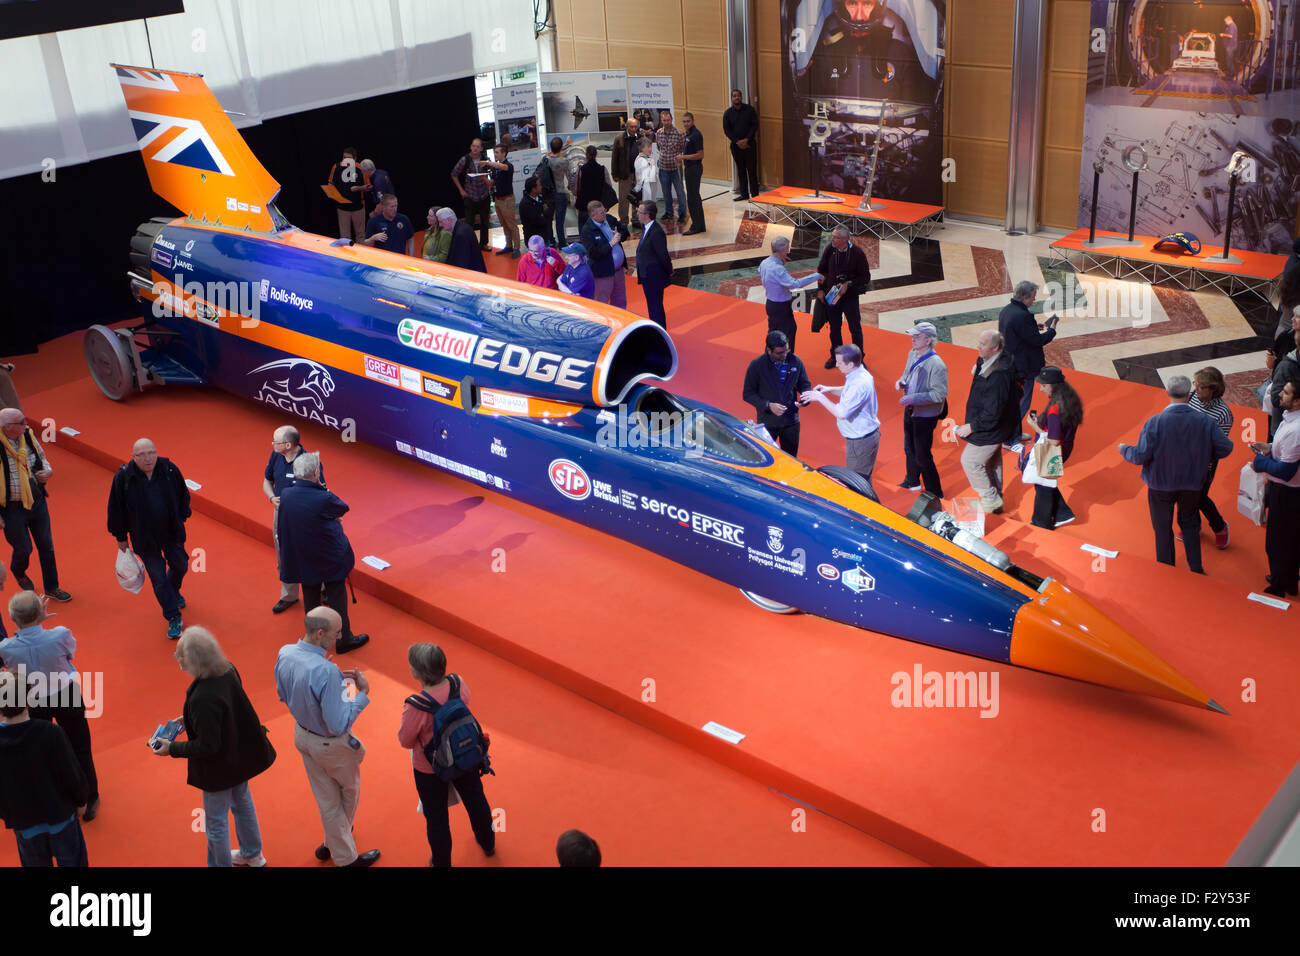 Wide-angle Arial view of the Bloodhound  Supersonic car, at is first public appearance, at Canary Wharf, London. Stock Photo